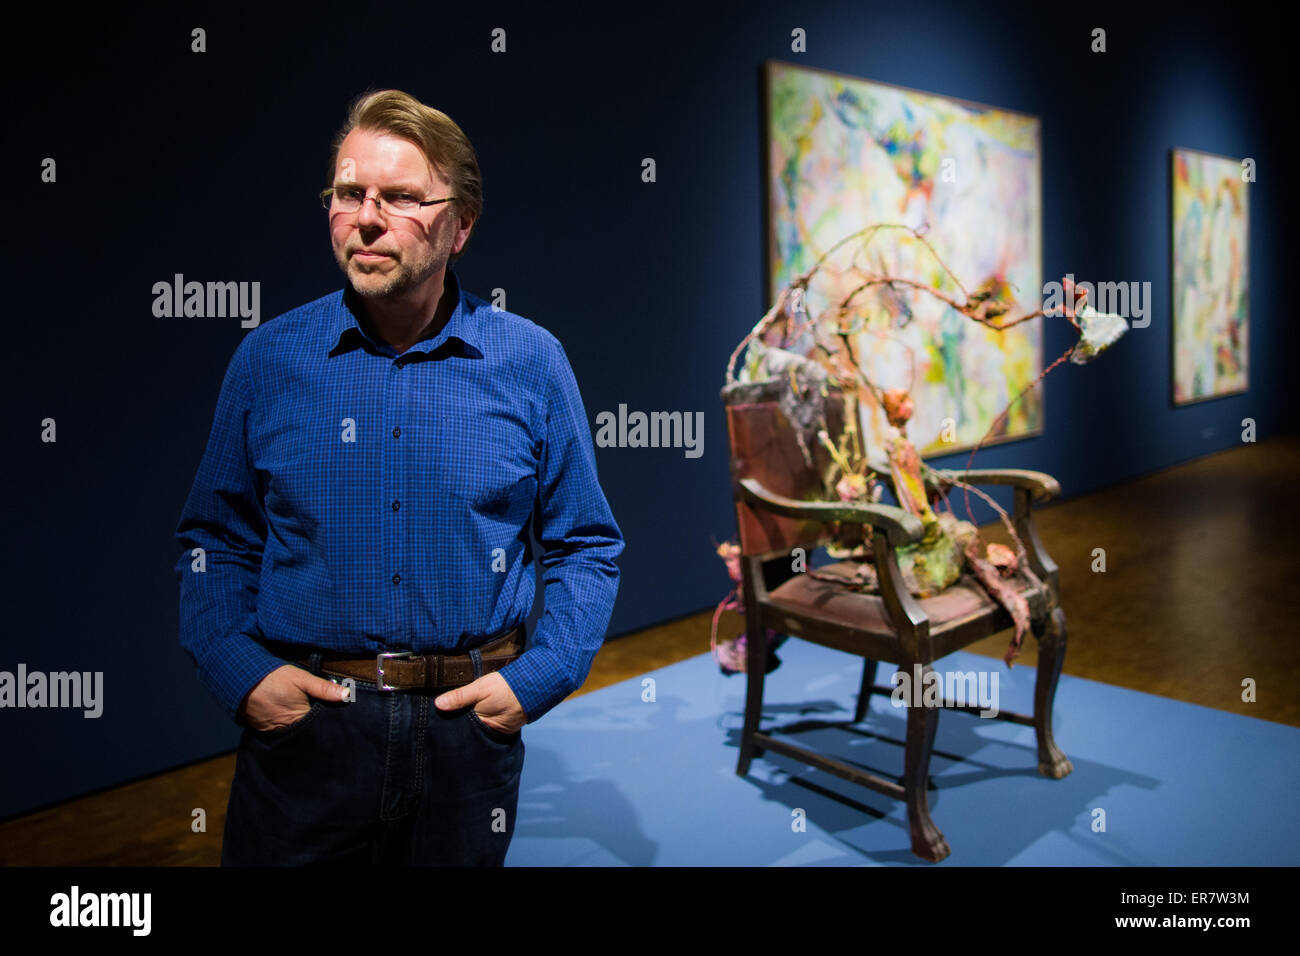 Cologne, Germany. 28th May, 2015. Curator Stephan Diederich stands in the exhibition 'Bernard Schultze - A Centennial Exhibition' in the Museum Ludwig in Cologne, Germany, 28 May 2015. Photo: ROLF VENNENBERND/dpa/Alamy Live News Stock Photo